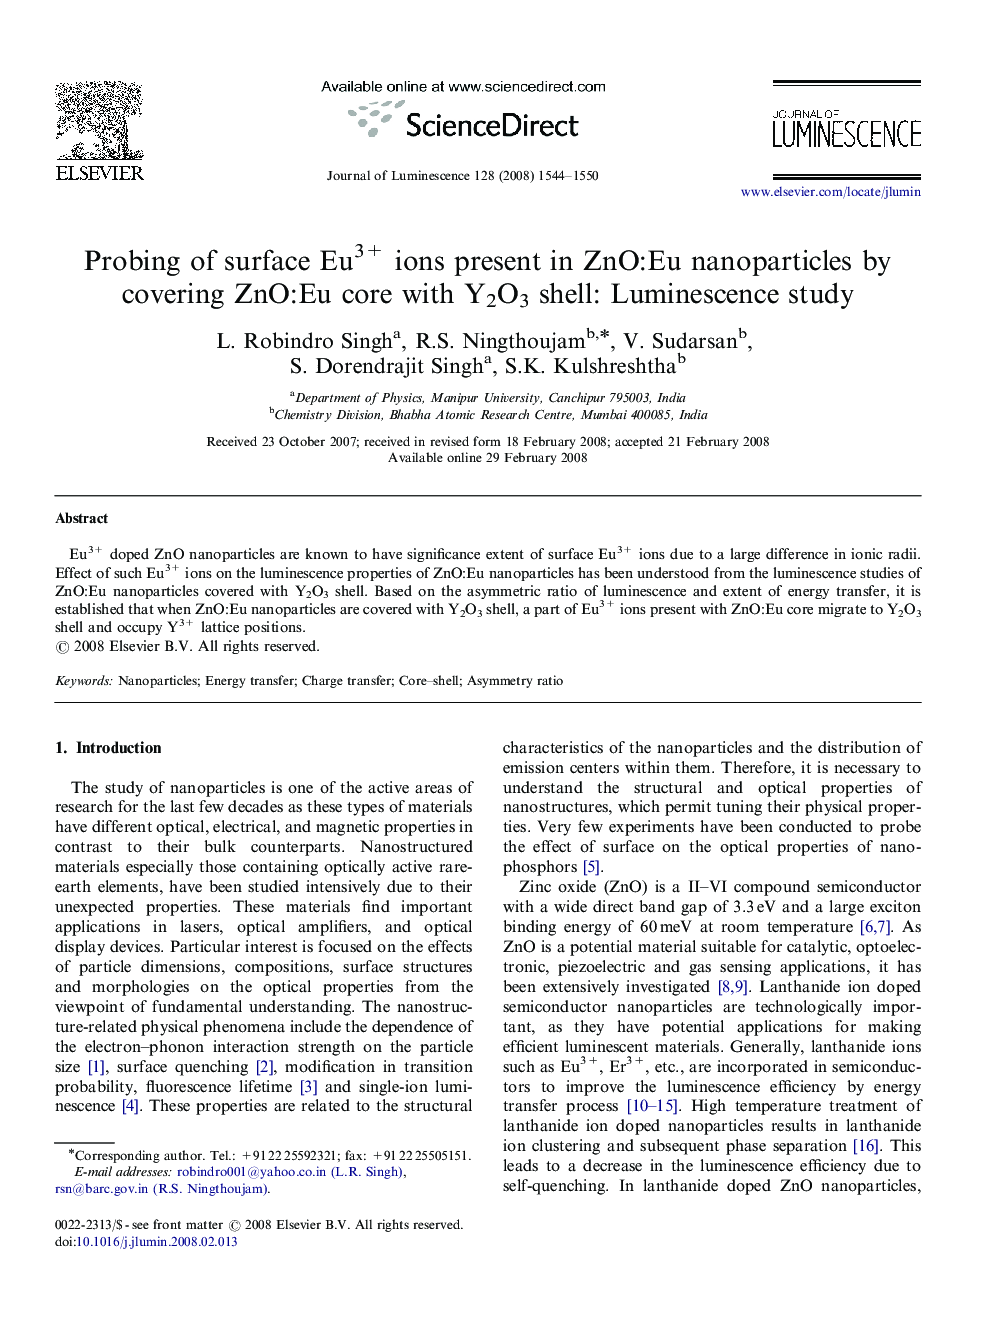 Probing of surface Eu3+ ions present in ZnO:Eu nanoparticles by covering ZnO:Eu core with Y2O3 shell: Luminescence study